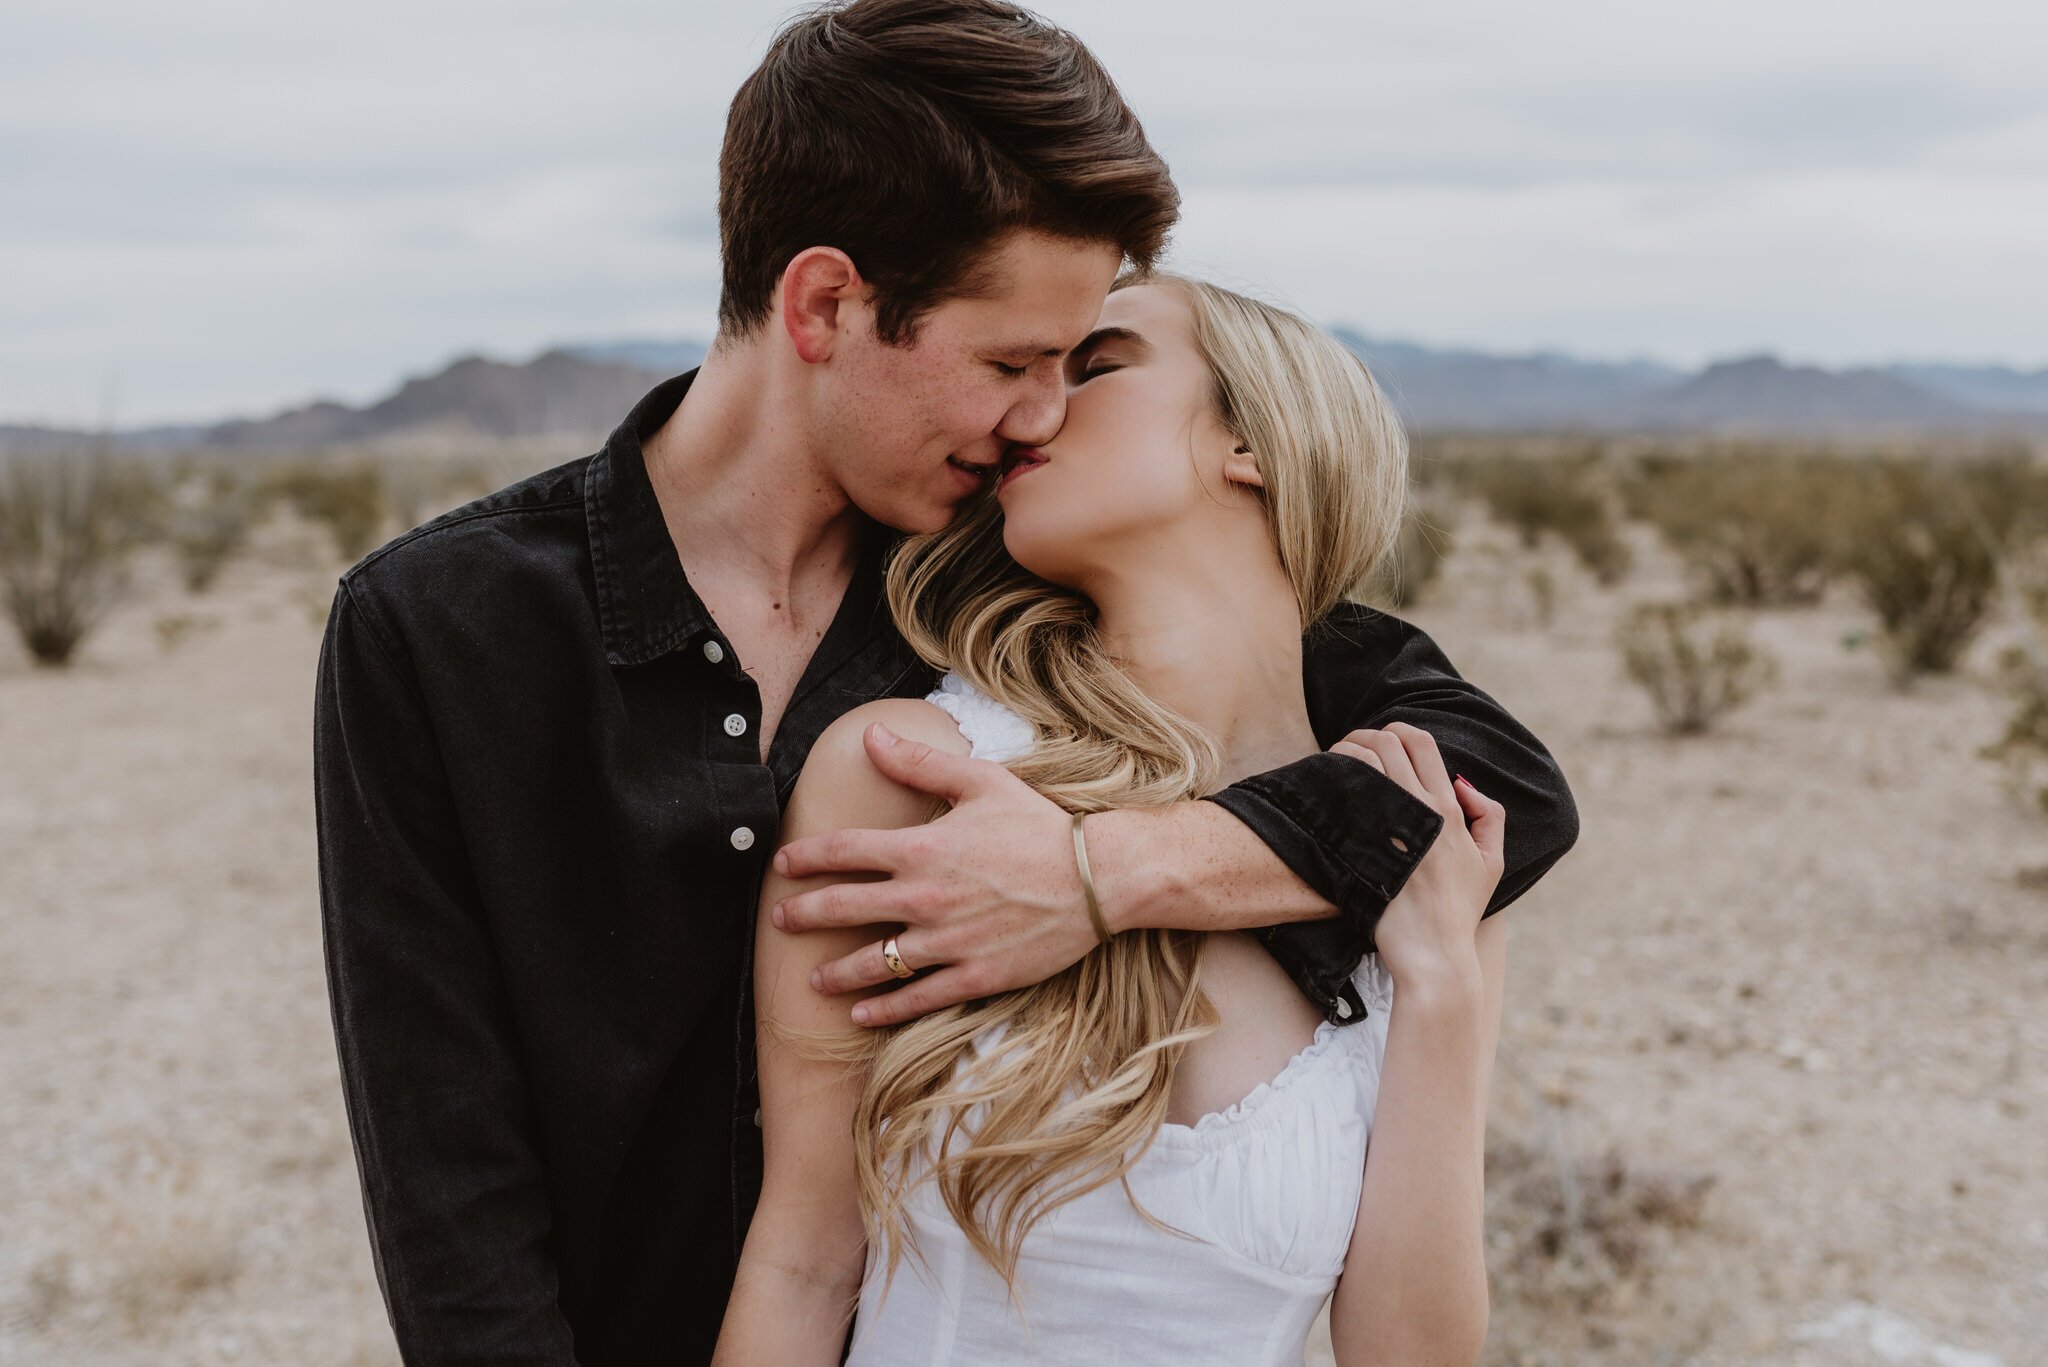 Kaylie-Sirek-Photography-Big-Bend-National-Park-Texas-Engagement-Session-Styled-You-026.jpg